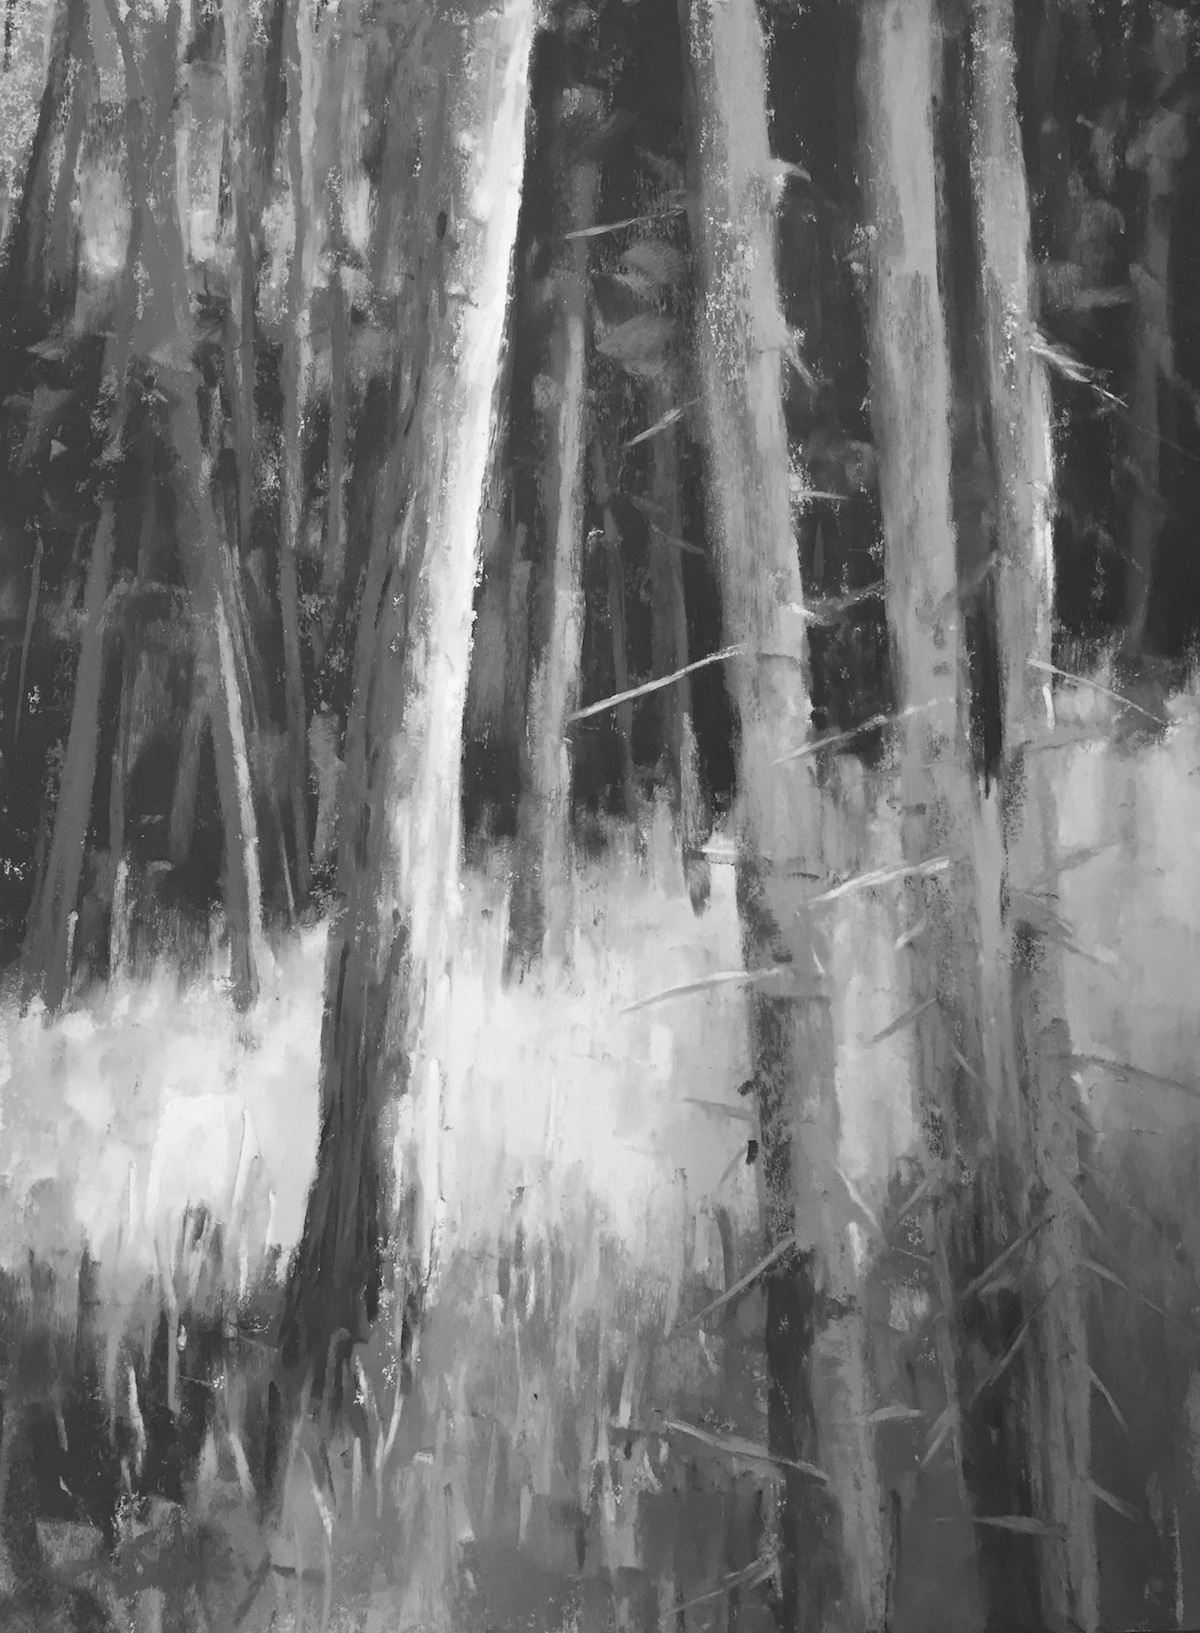 Painting summer greens in soft pastels: Gail Sibley, "Metchosin Woods," Unison pastels on UART 400, 12 x 9 in - in black and white (photo with iPhone)